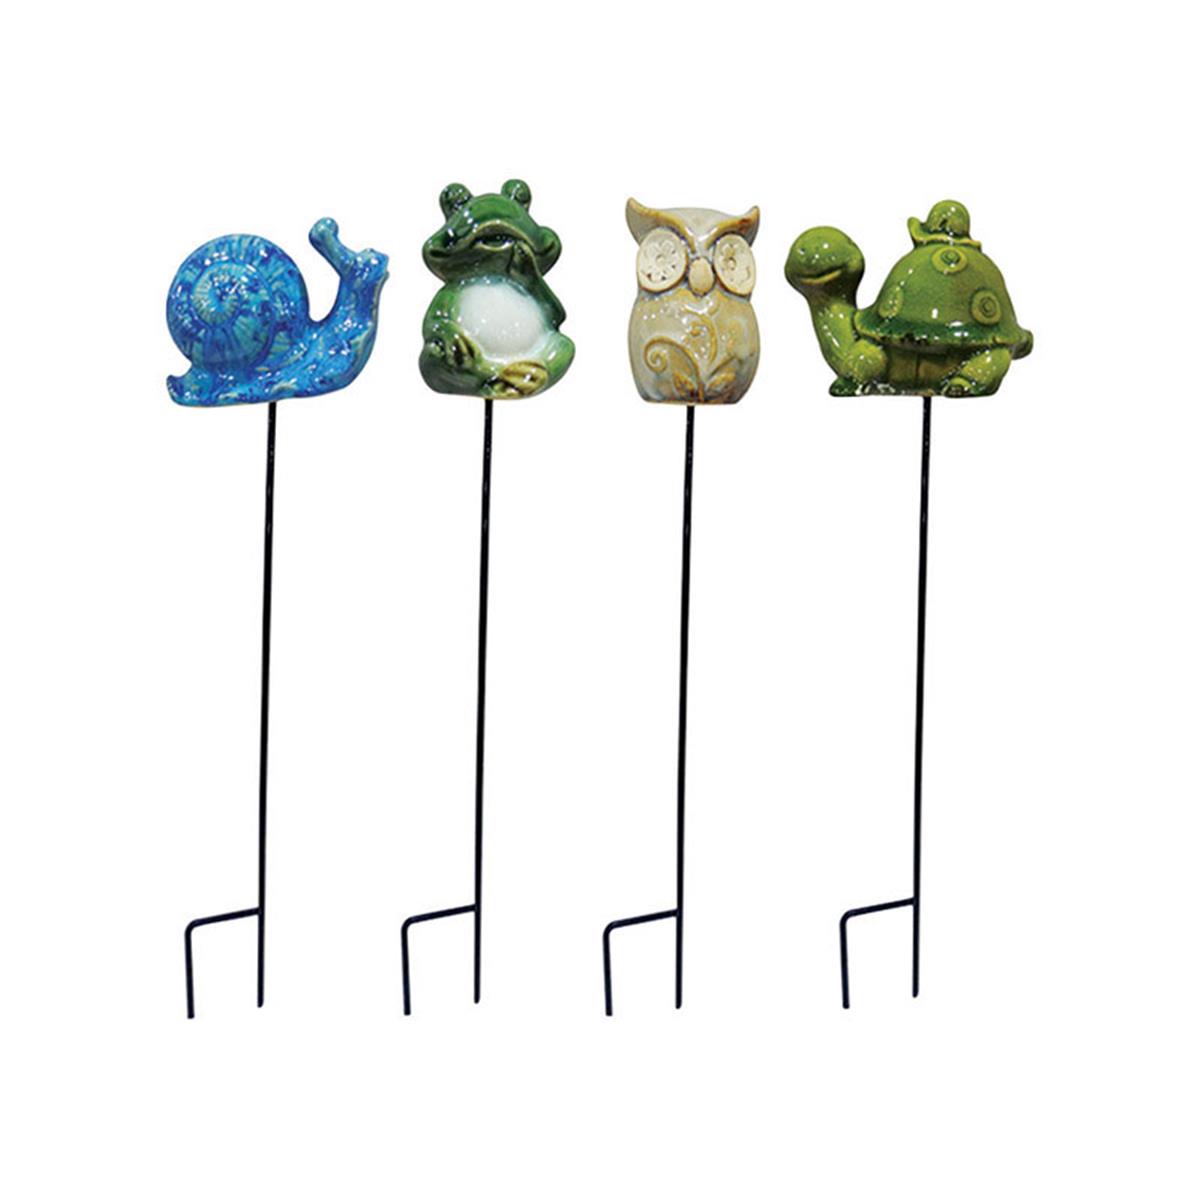 Picture of ACE Trading pine Quanzhou Keyan KLL112ABB 15 in. Ceramic Animal Garden Stake   - pack of 12